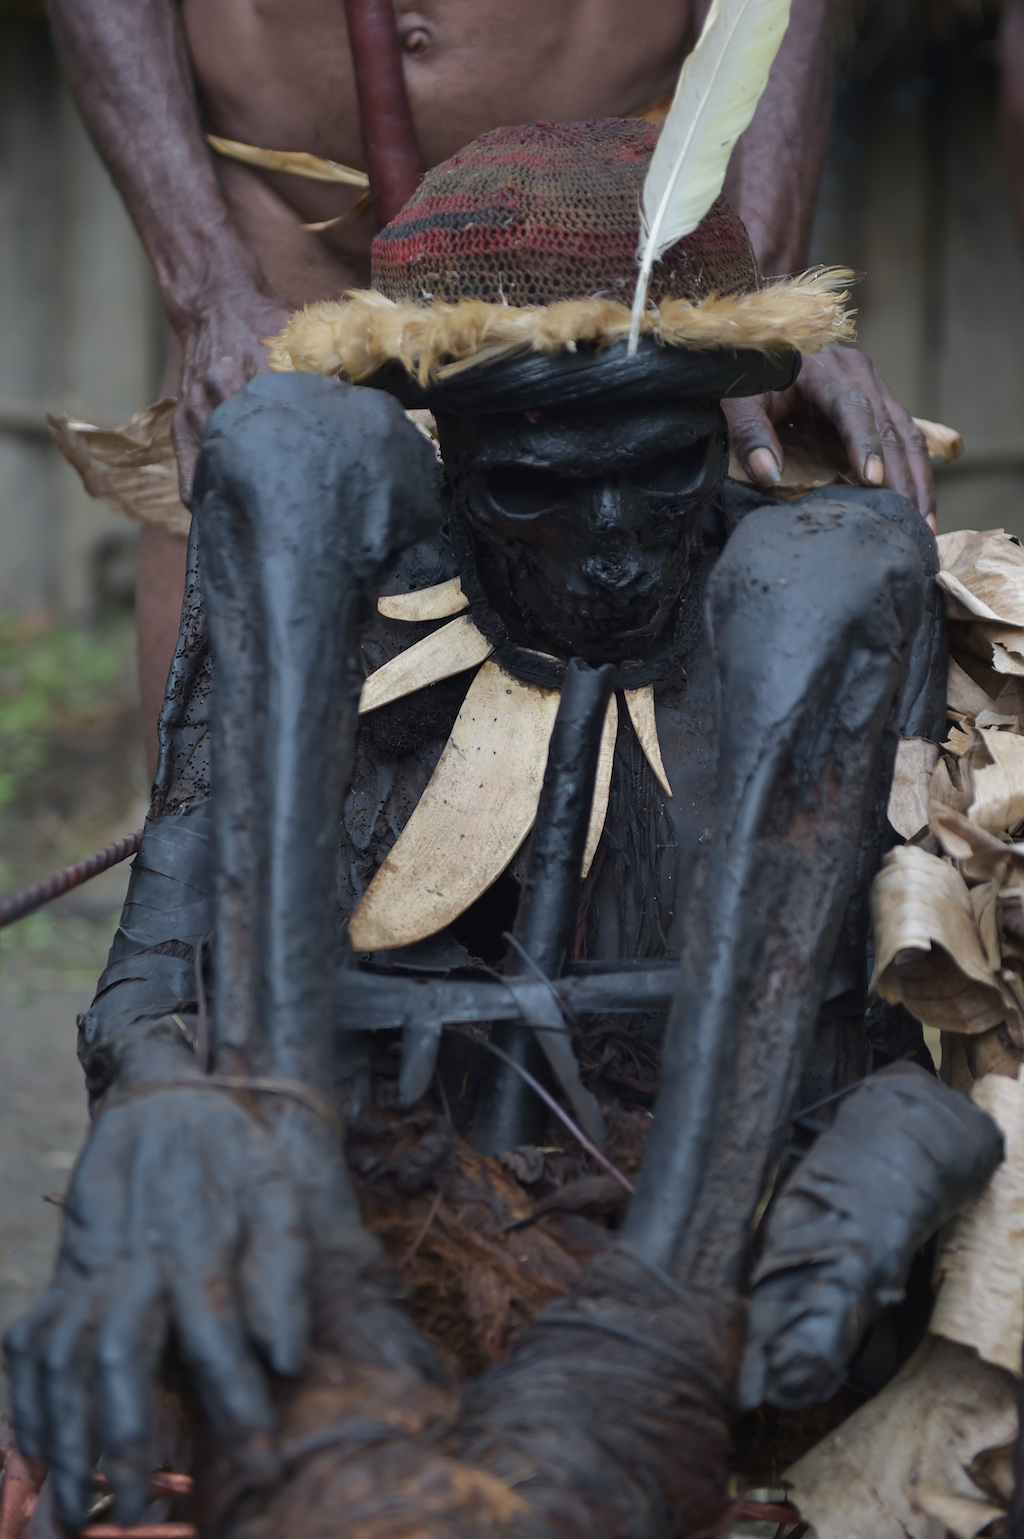 This photo taken on August 7, 2016 shows a mummy of the Dani tribe, Agat Mamete Mabel, being displayed in the village of Wogi in Wamena, the long-isolated home of the Dani tribe high in the Papuan central highlands. Despite smoked mummification being no longer practised for Dani tribes people, they still preserve a number of mummies, some a few hundred years old, as a symbol of their highest respects to their ancestors, which in recent years has attracted tourists from around the world. / AFP PHOTO / ADEK BERRY